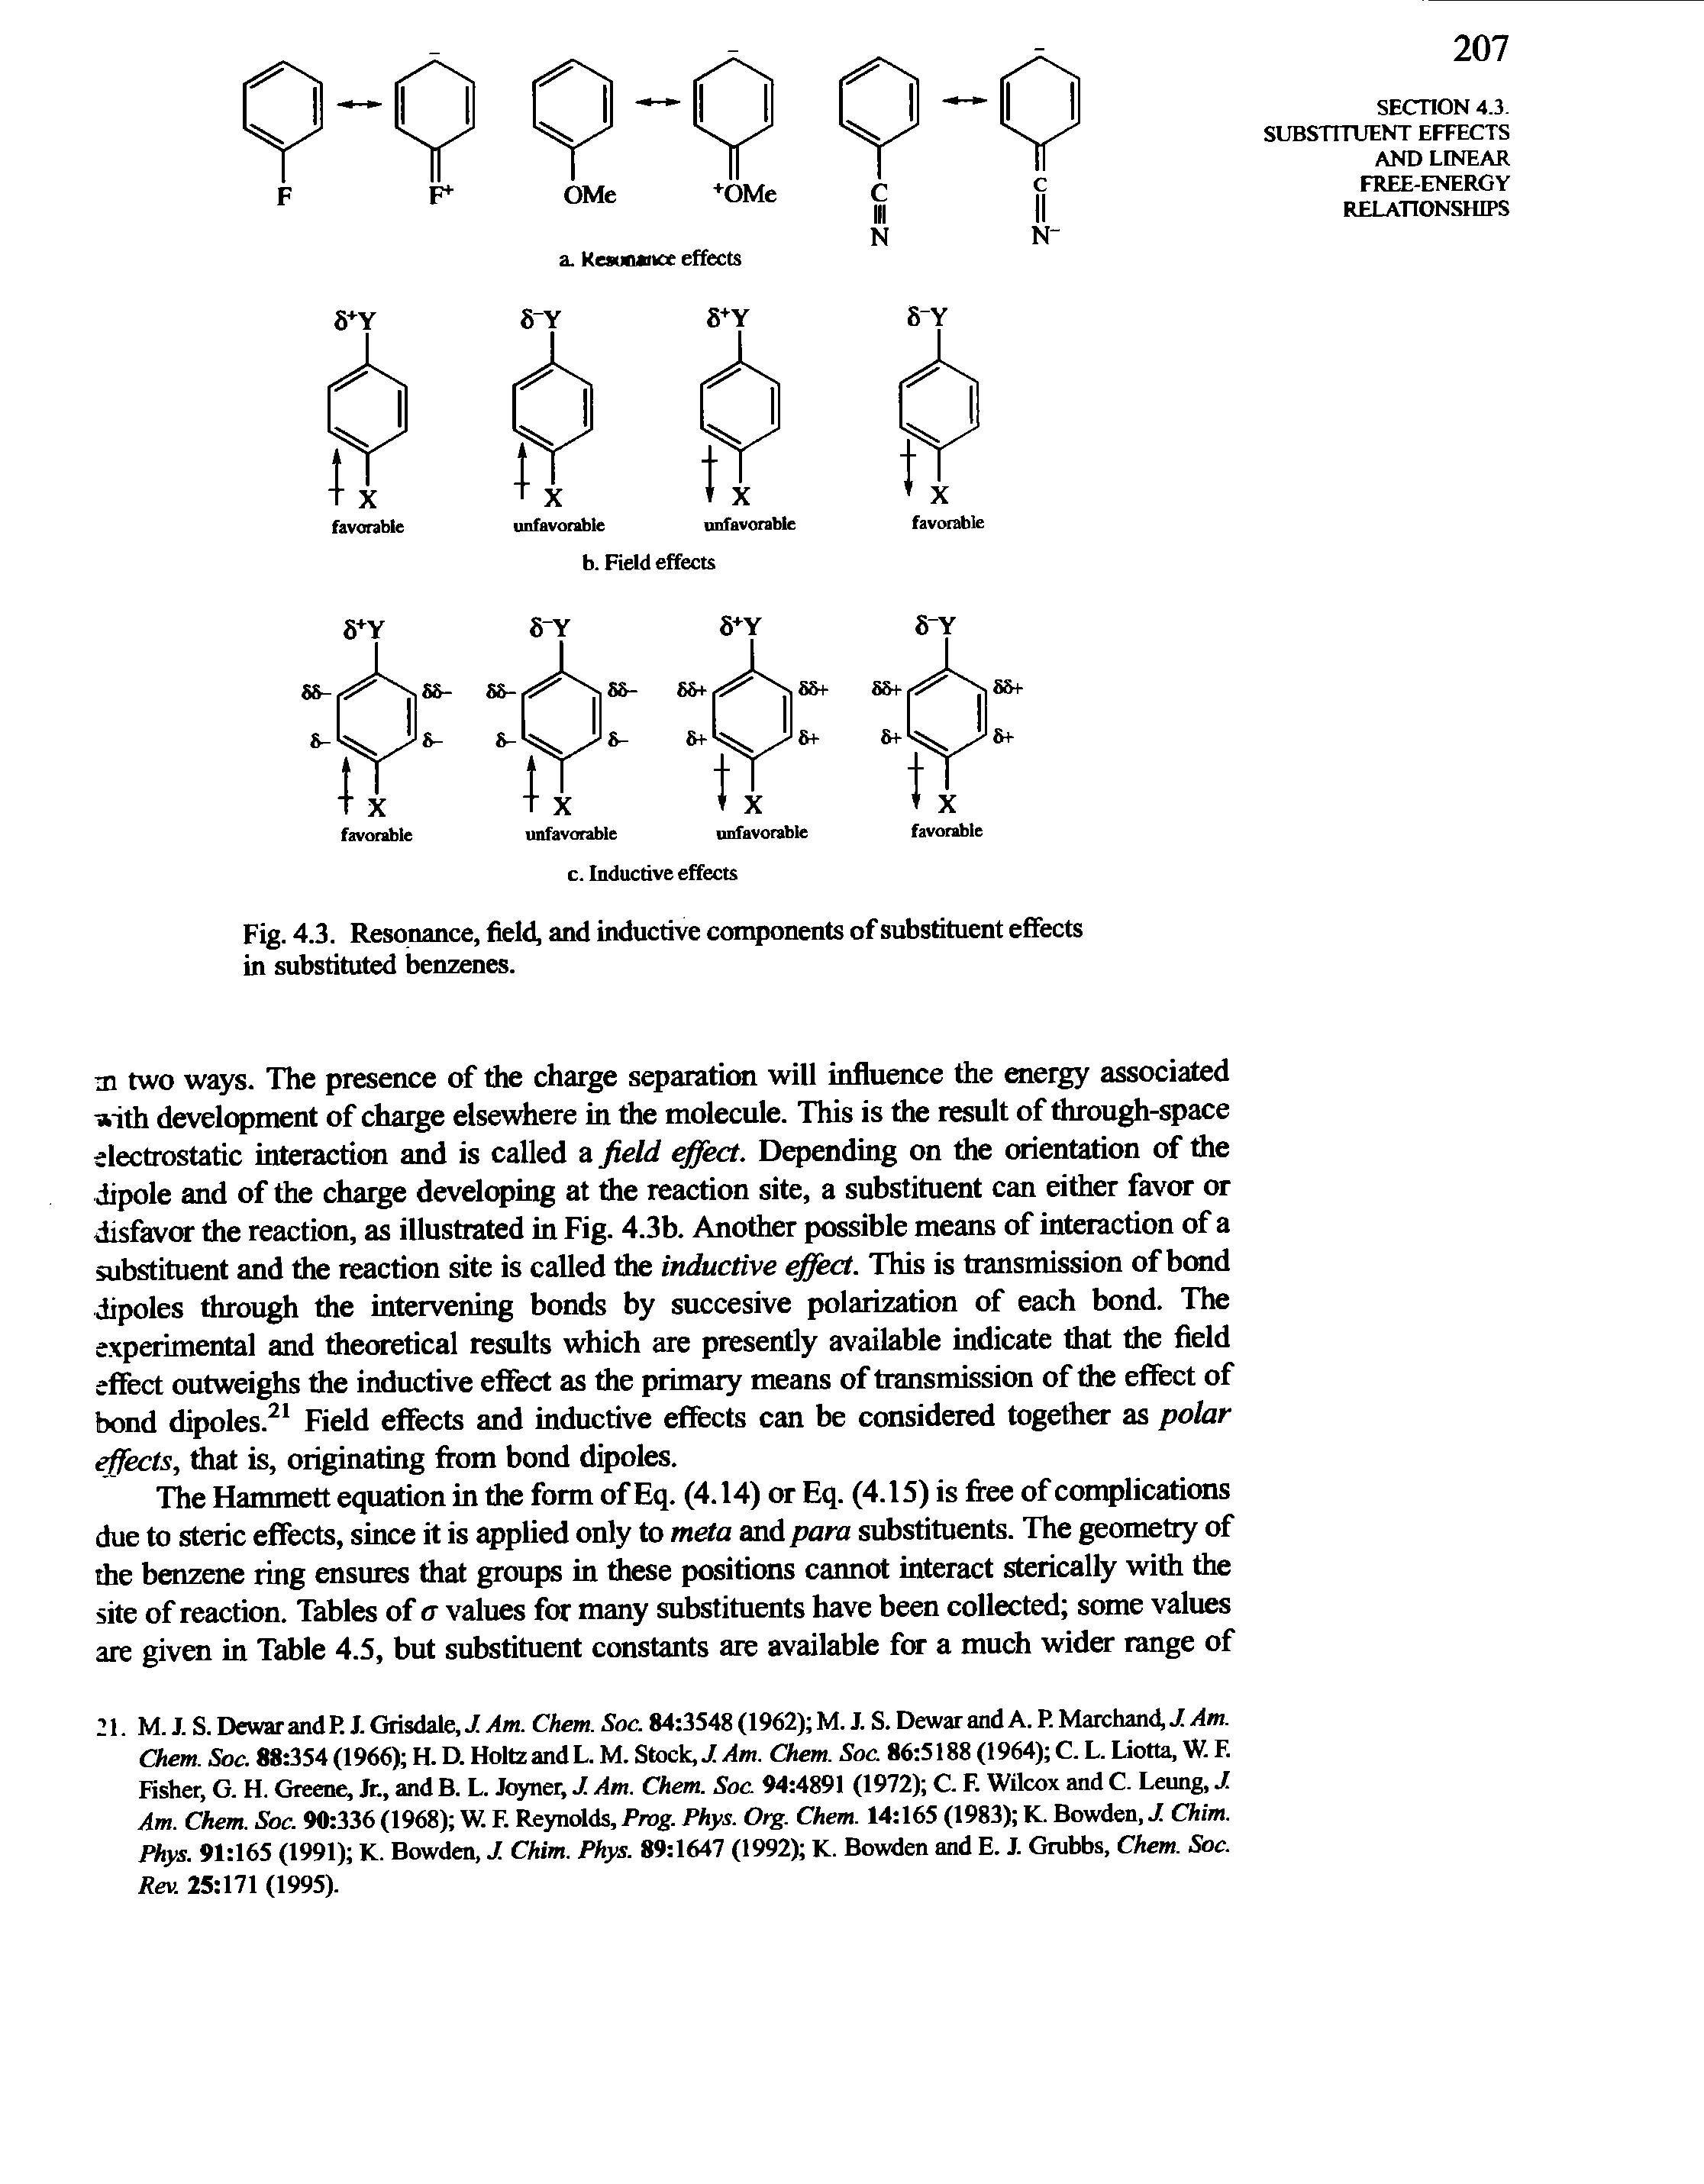 Fig. 4.3. Resonance, field, and inductive components of substituent effects in substituted benzenes.